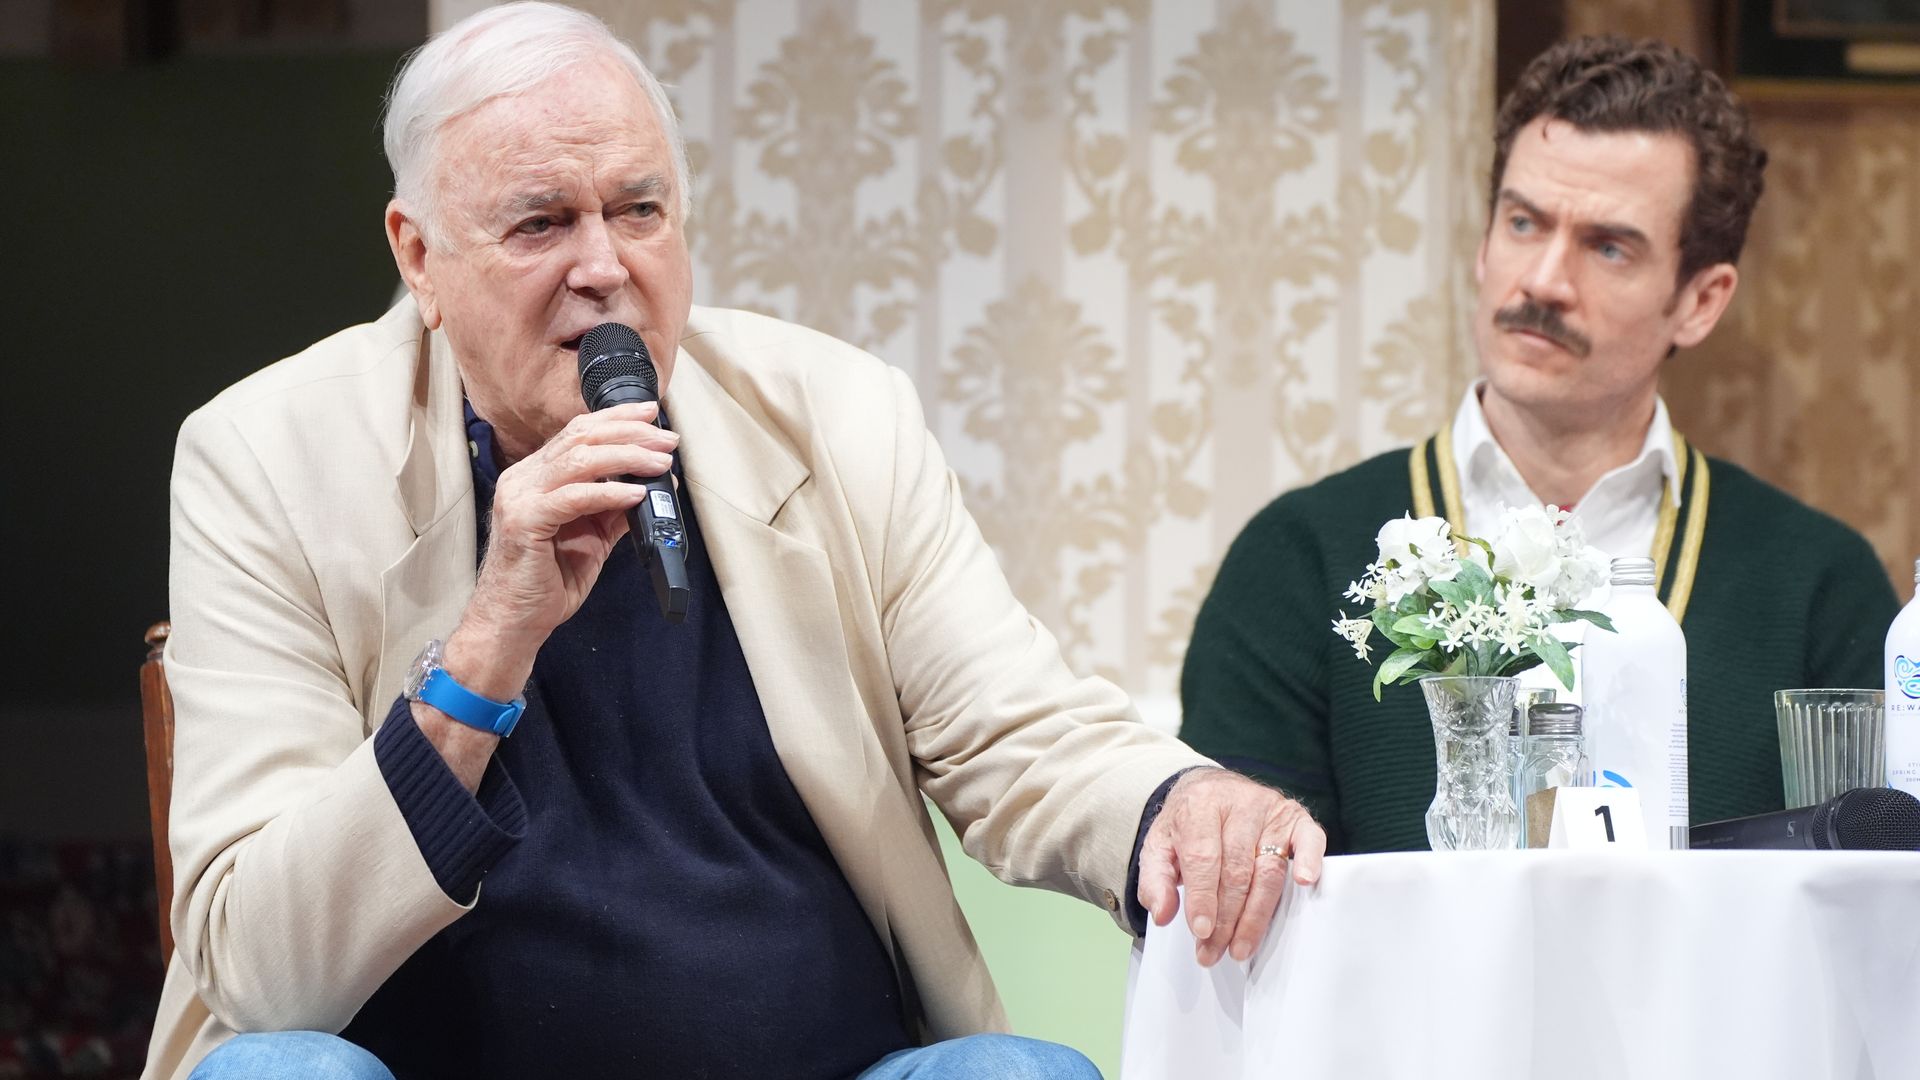 John Cleese, 84, reflects on ‘literal-minded’ people at Fawlty Towers play